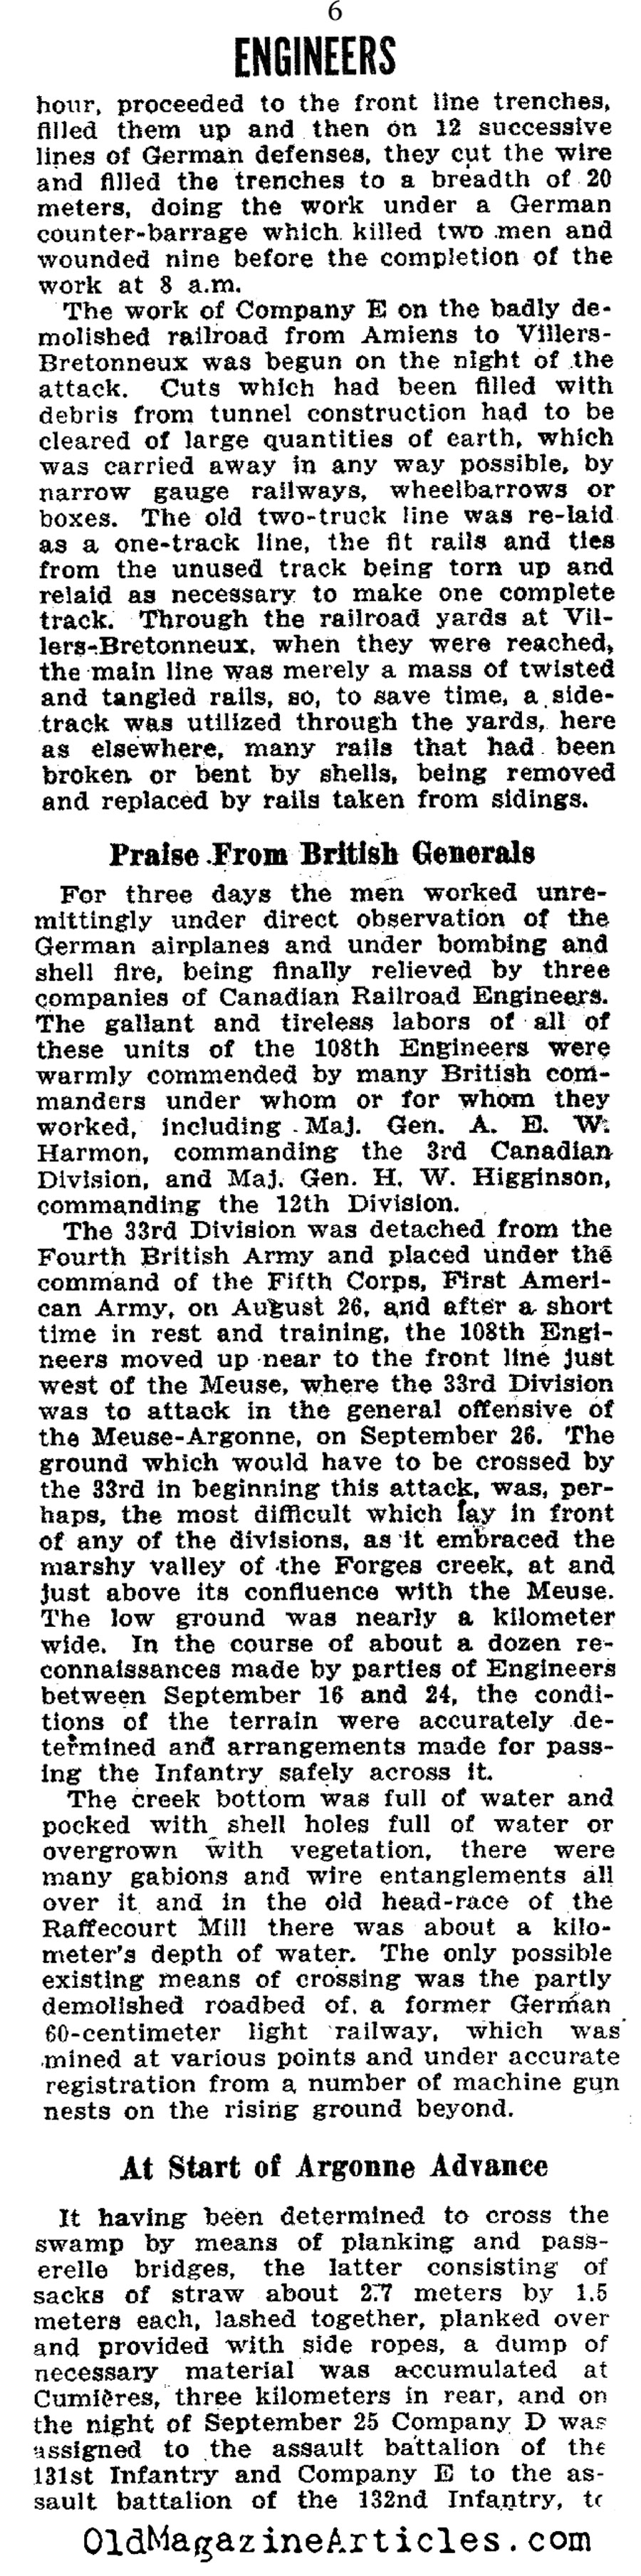 The U.S. Sixth Engineers and the 1918 March Offensive <BR>(The Stars and Stripes,1919)